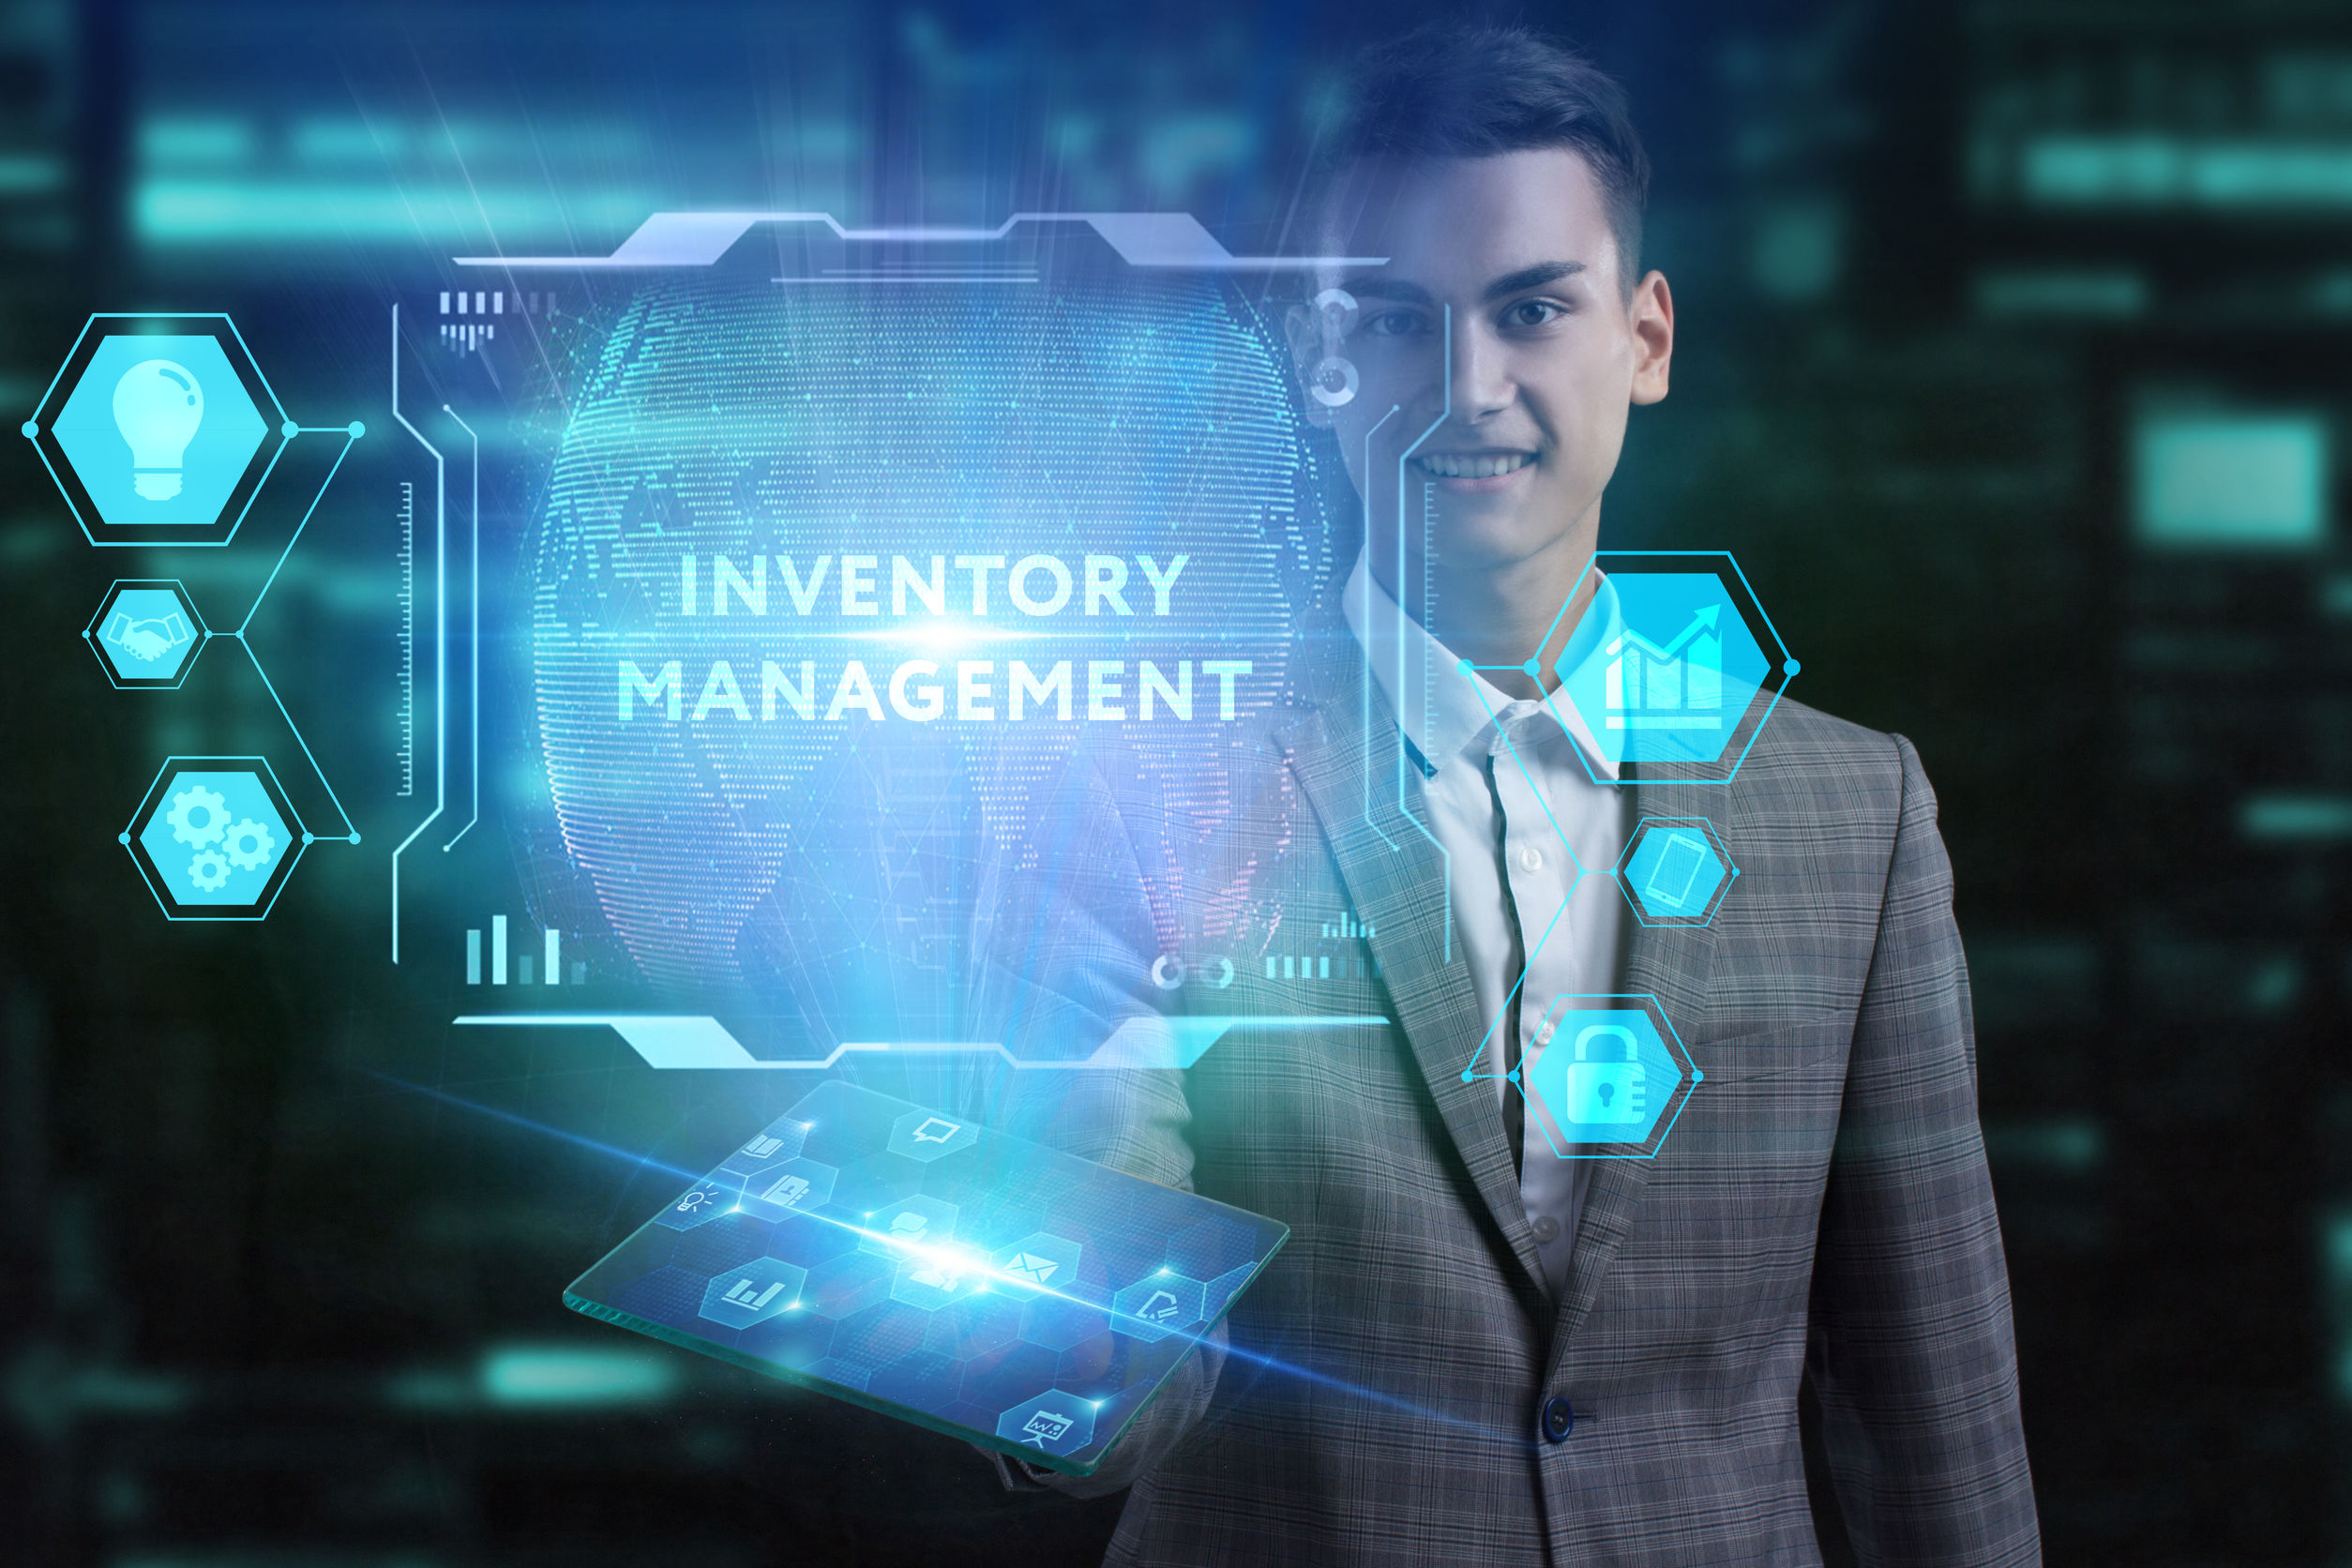 7 Tips to Streamline Inventory Management for Operational Resiliency